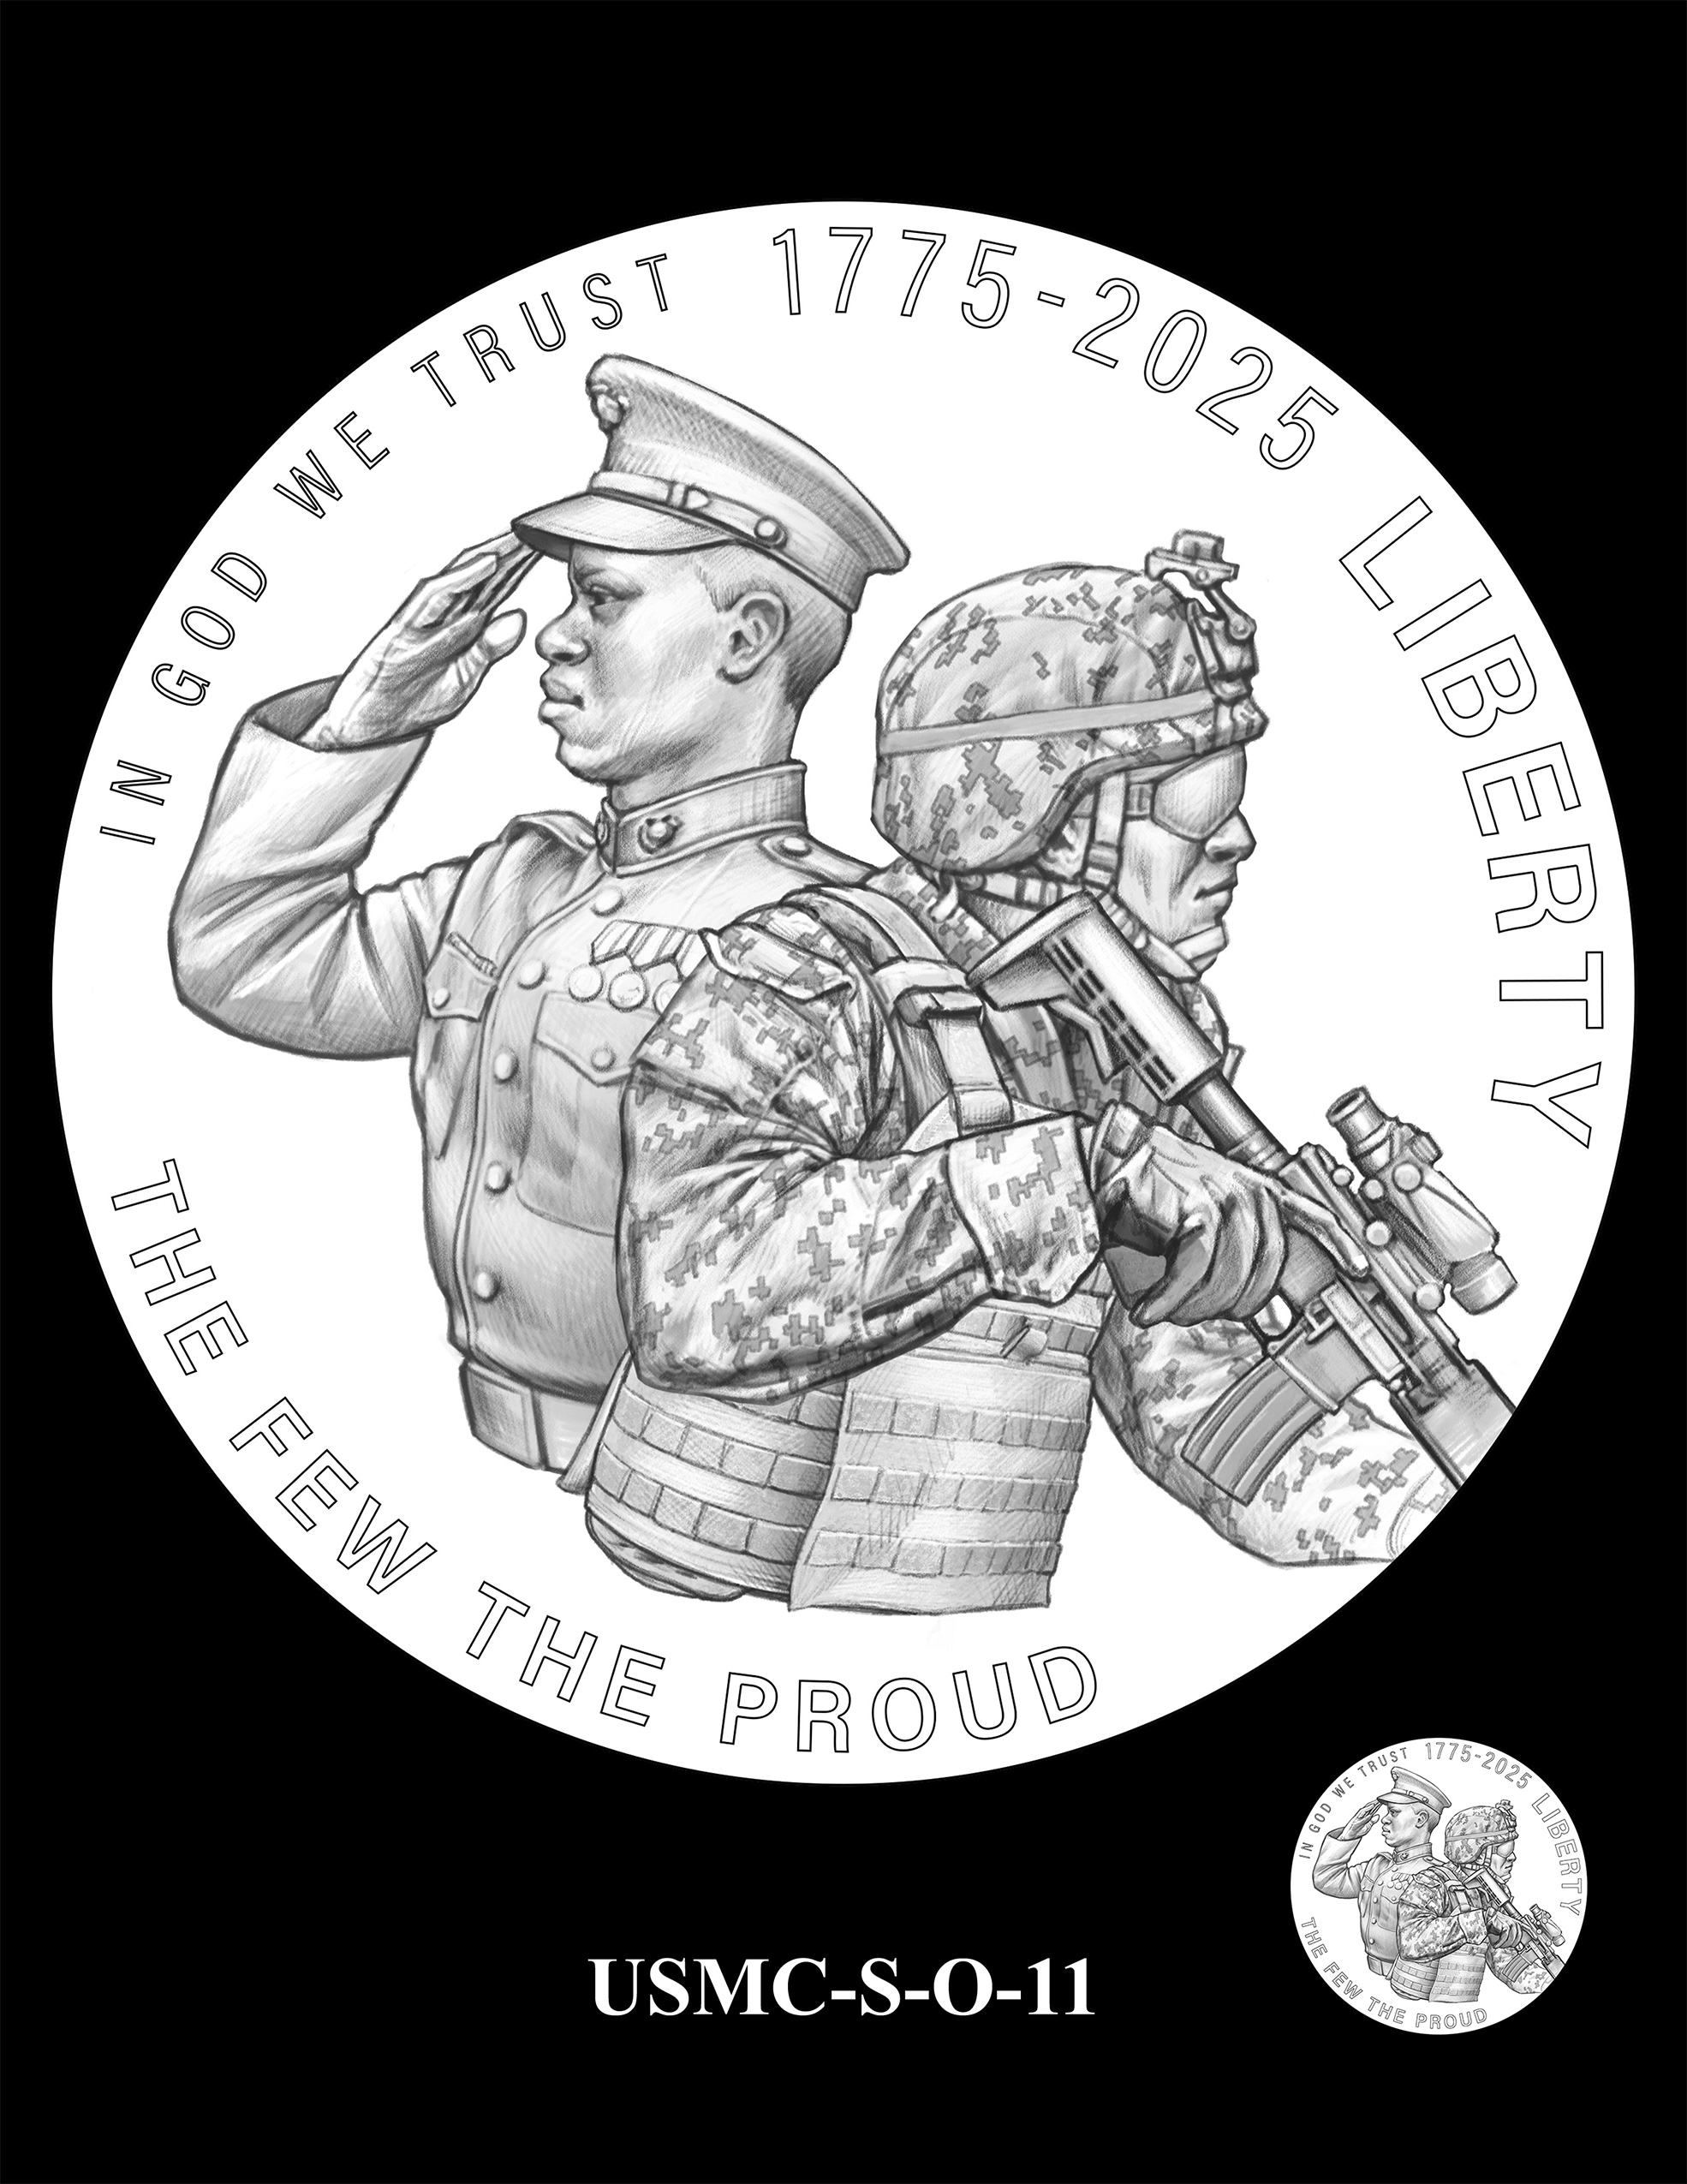 USMC-S-O-11 -- 250th Anniversary of the United States Marine Corps - Silver